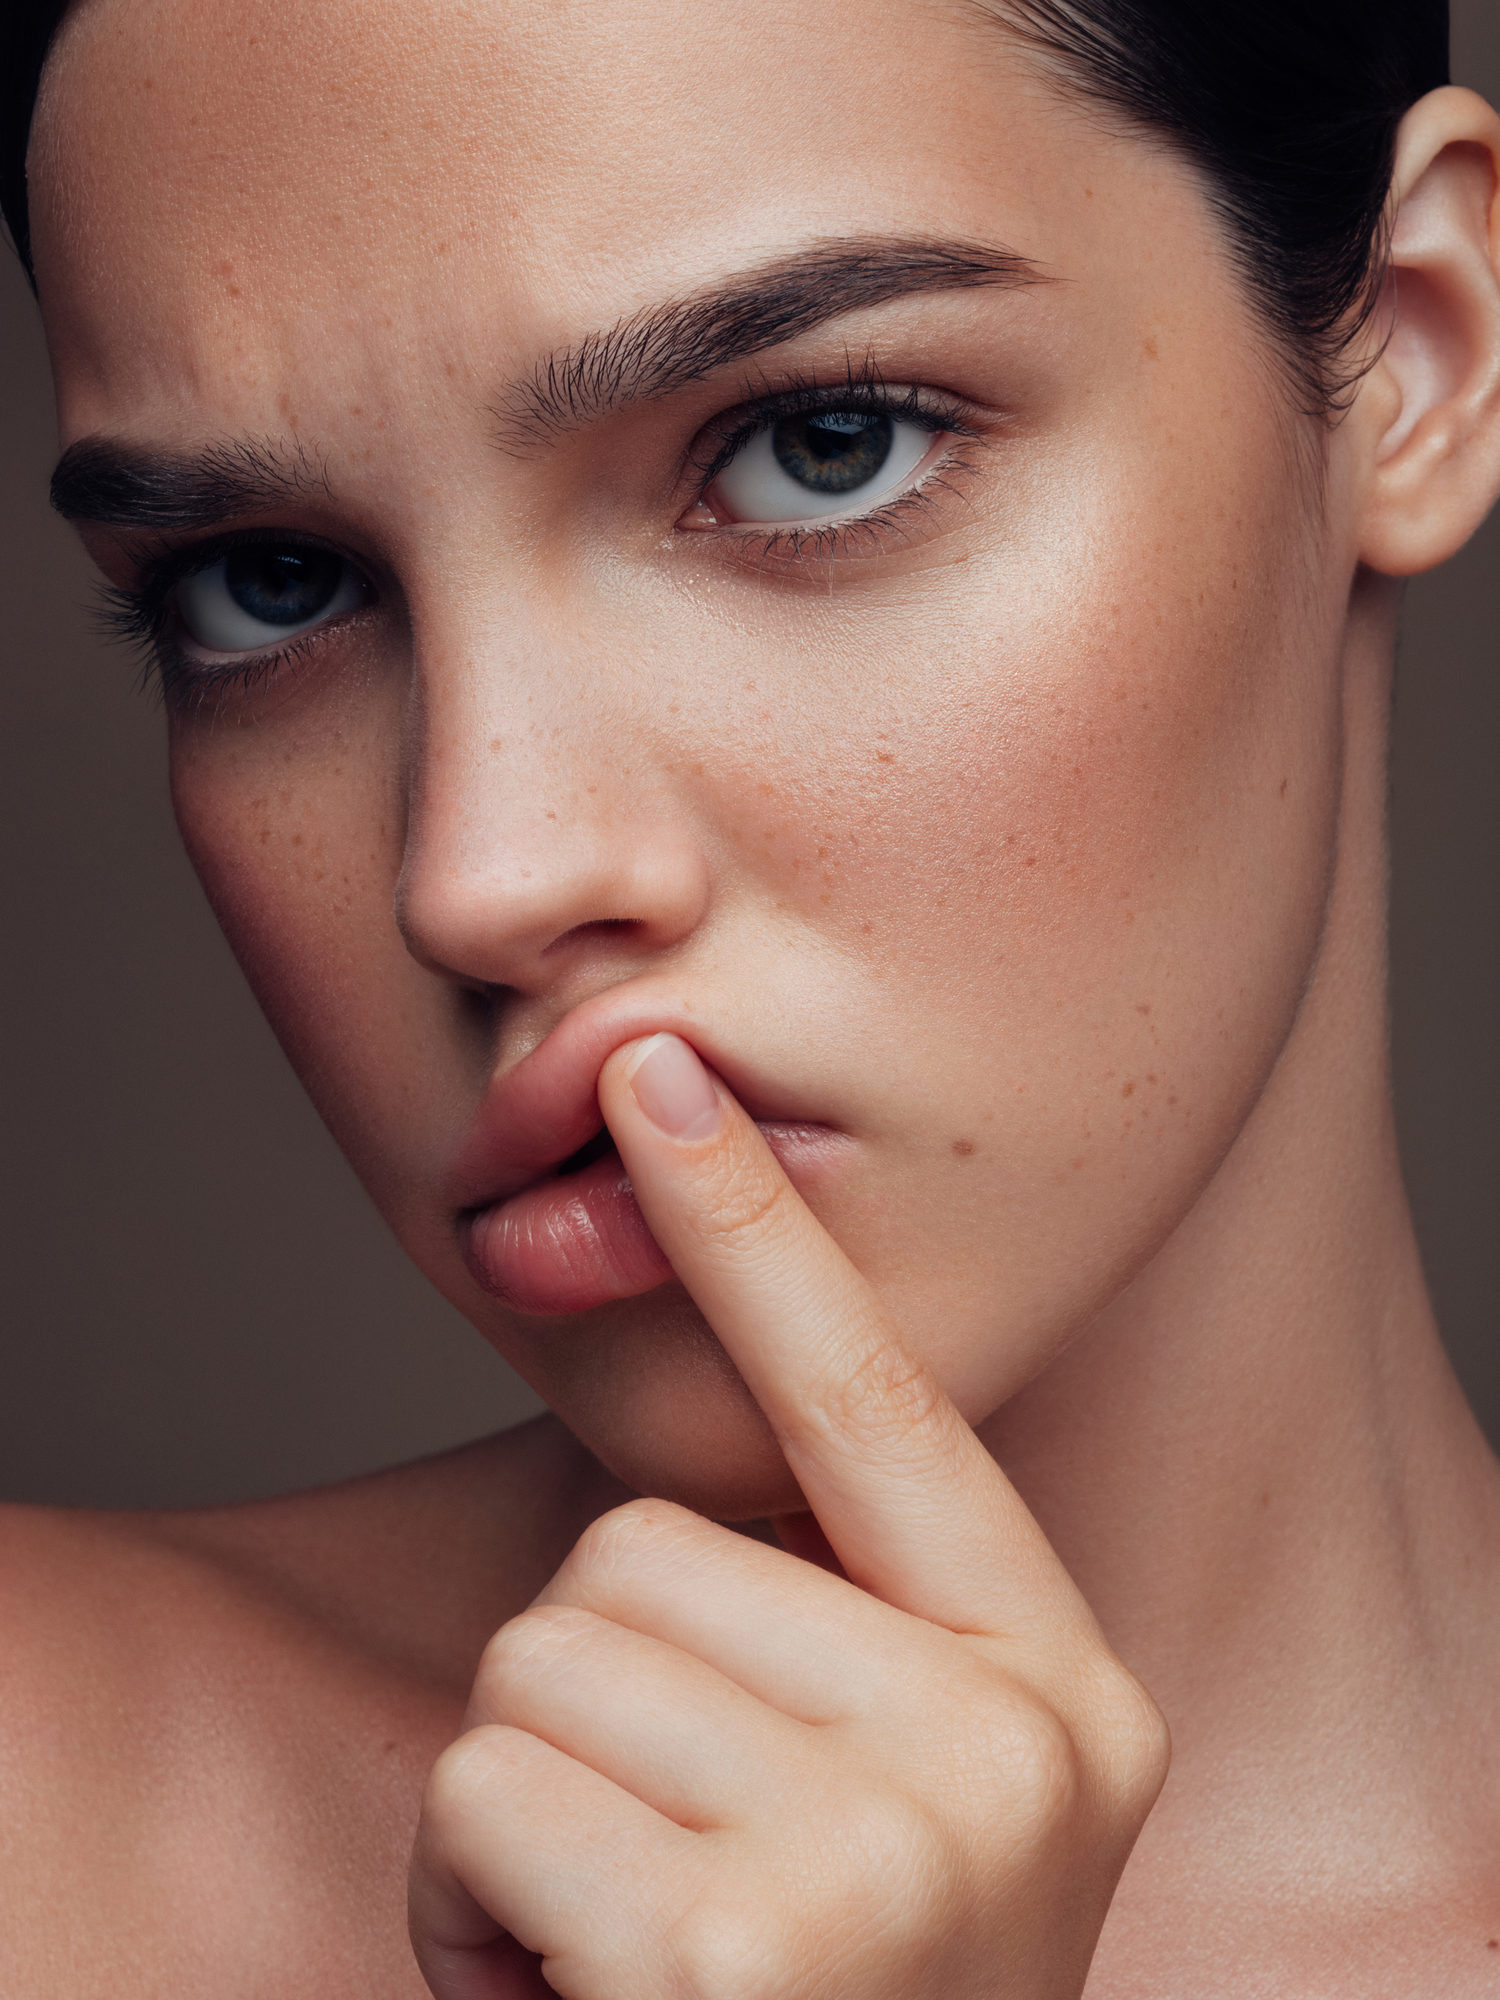 Woman pushing on her lip with pointer finger